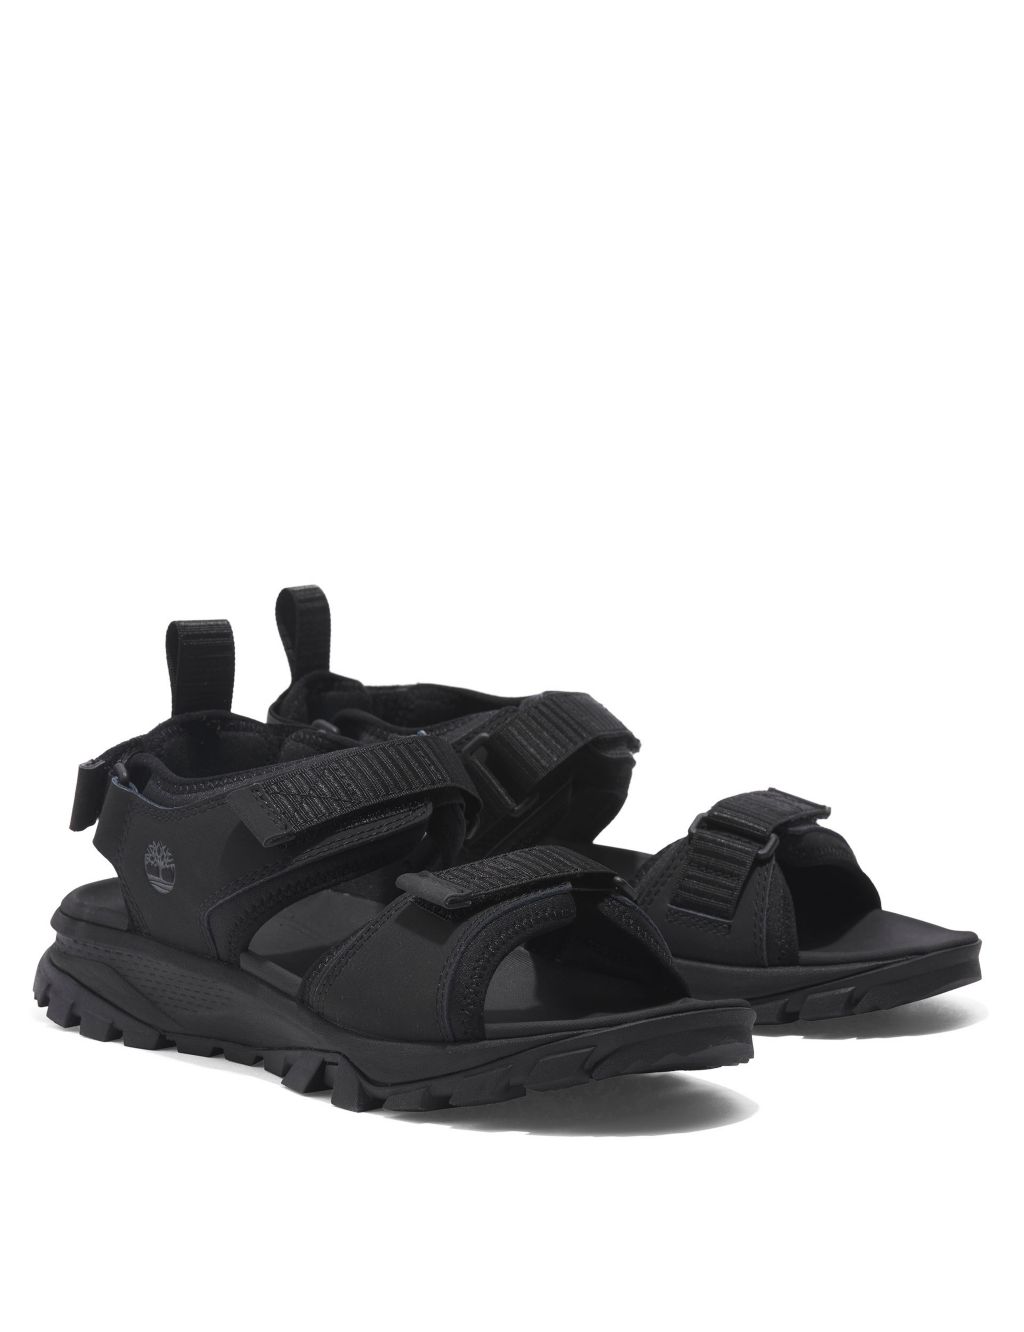 Lincoln Peak Leather Walking Sandals 1 of 6